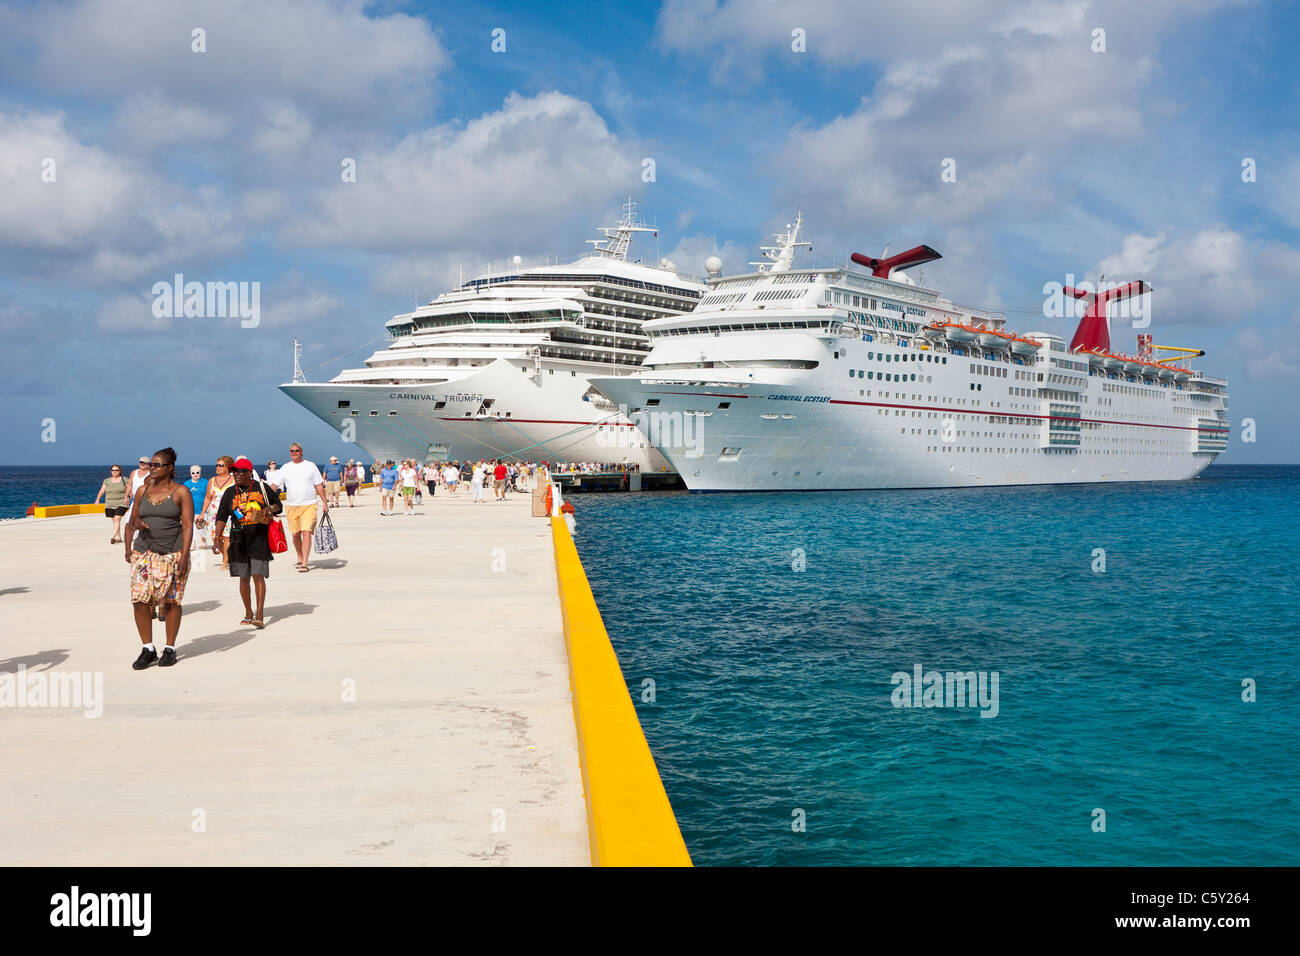 Cruise ship passengers on pier disembarking from cruise ships in Cozumel, Mexico in the Caribbean Sea Stock Photo